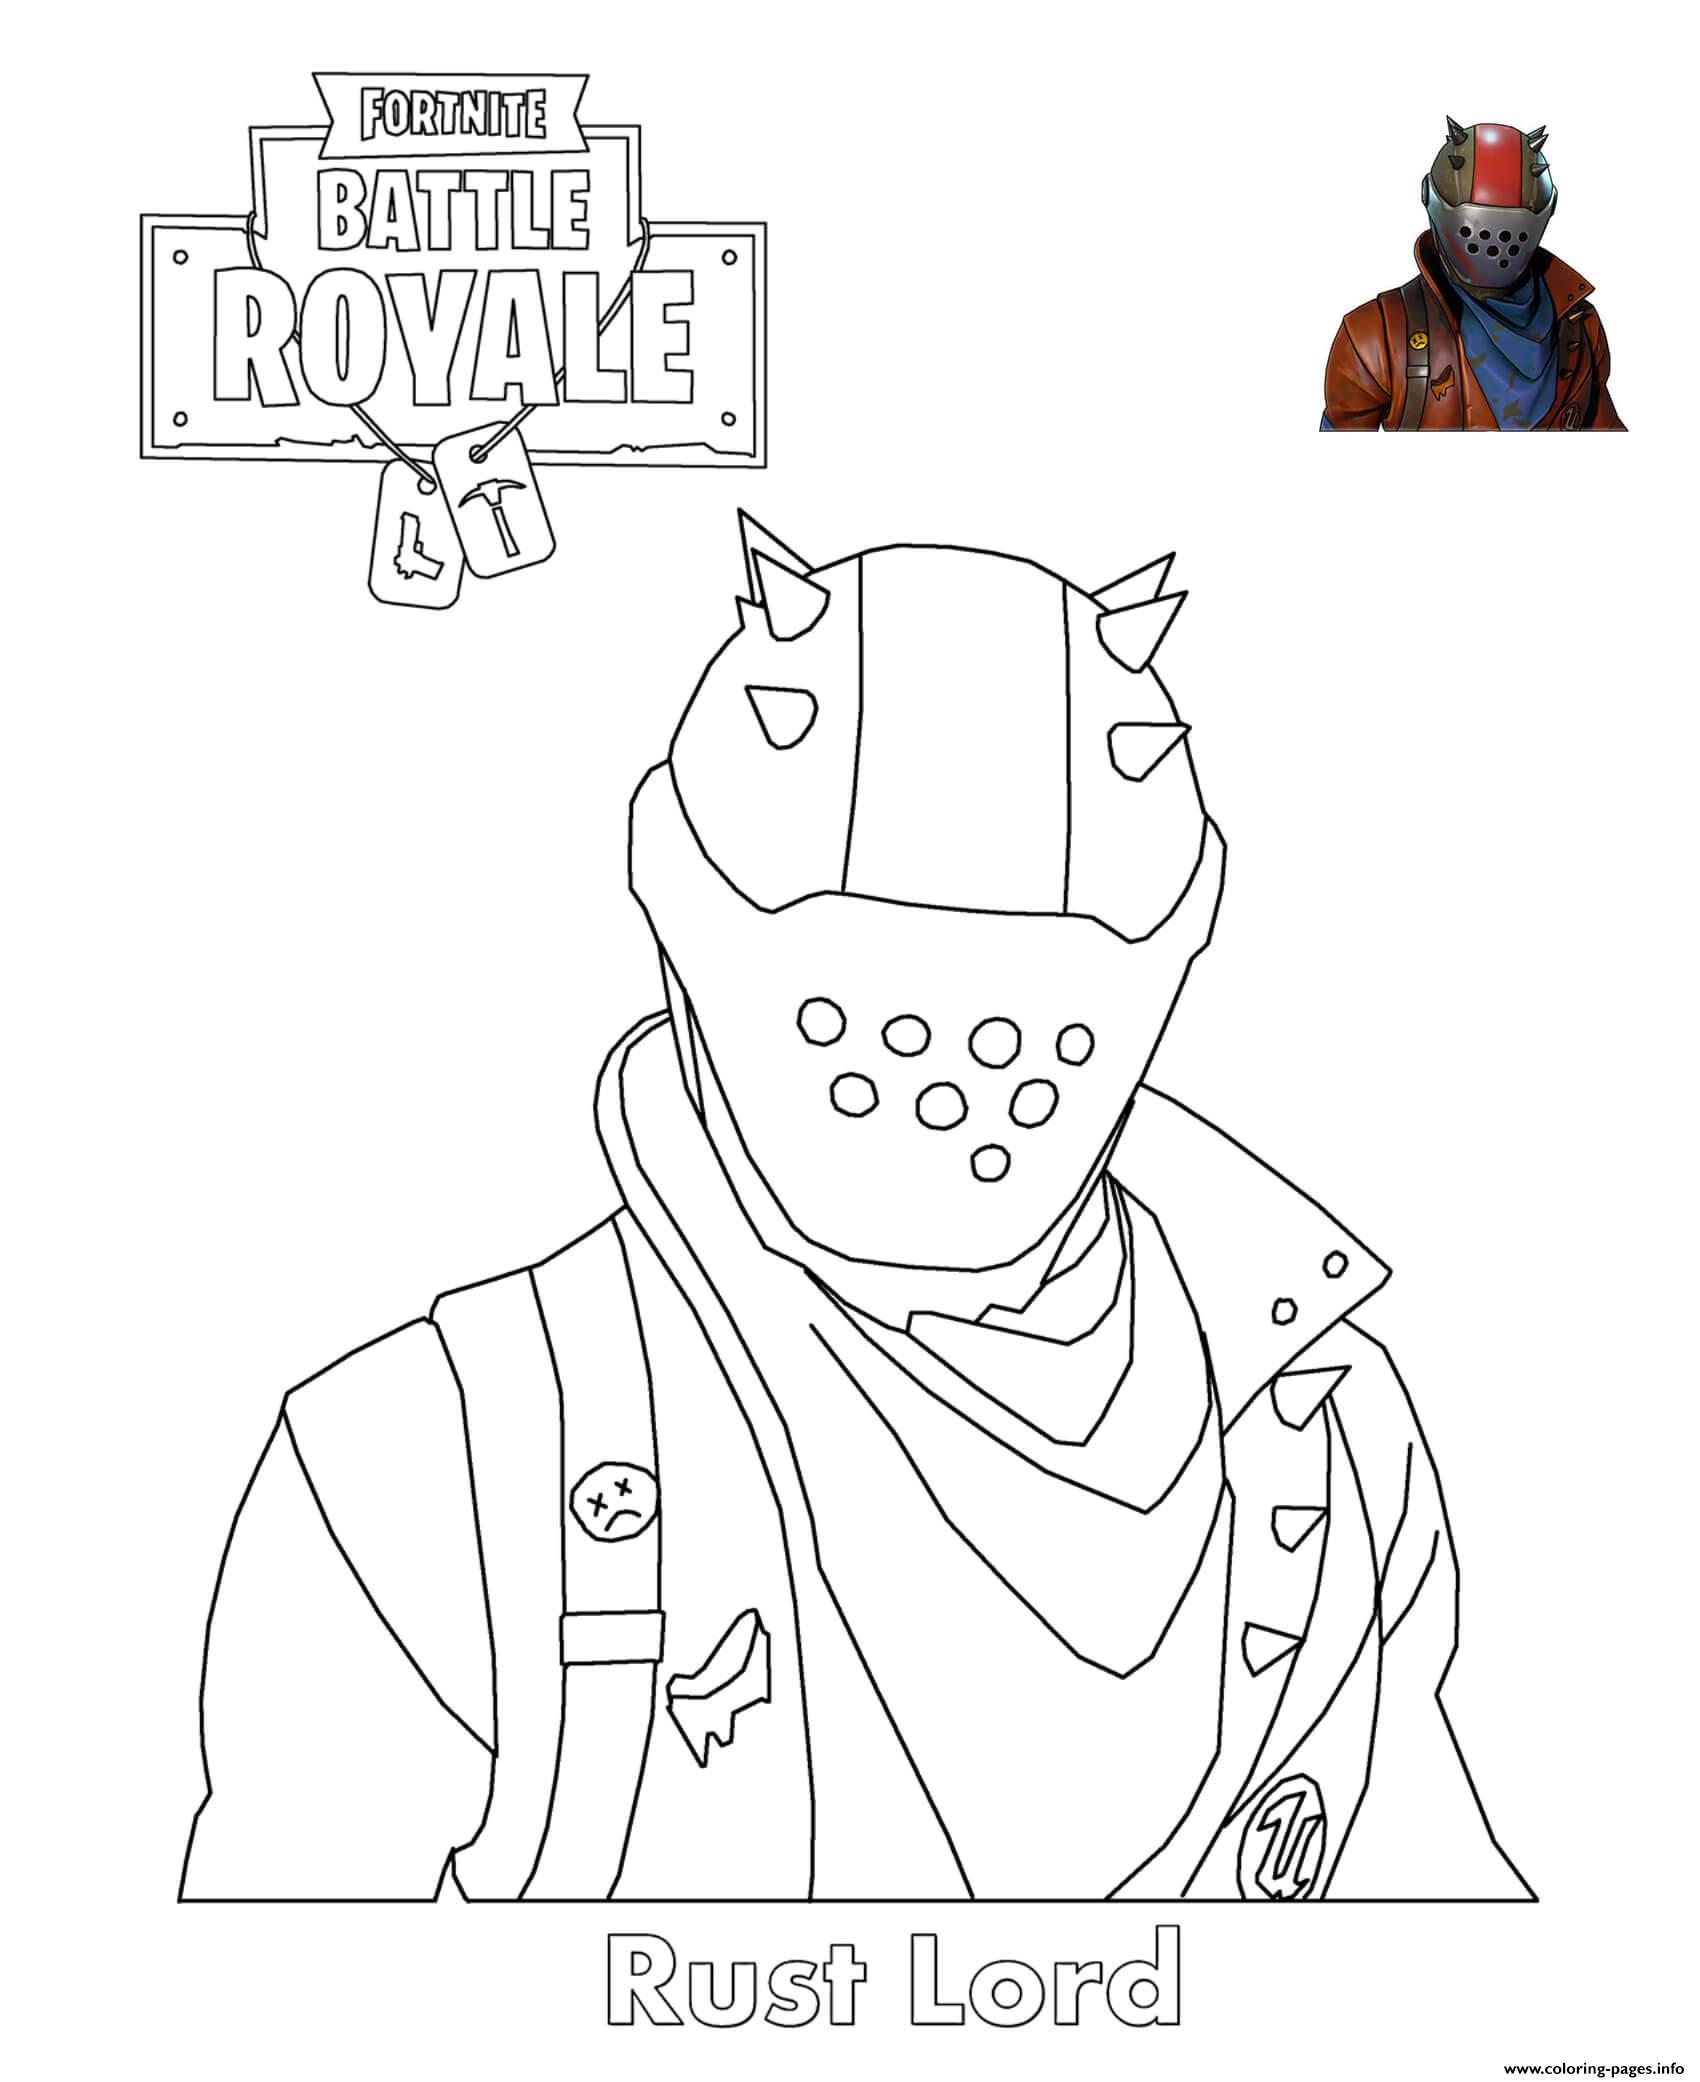 Rust Lord Fortnite Battle Royale Coloring page Printable